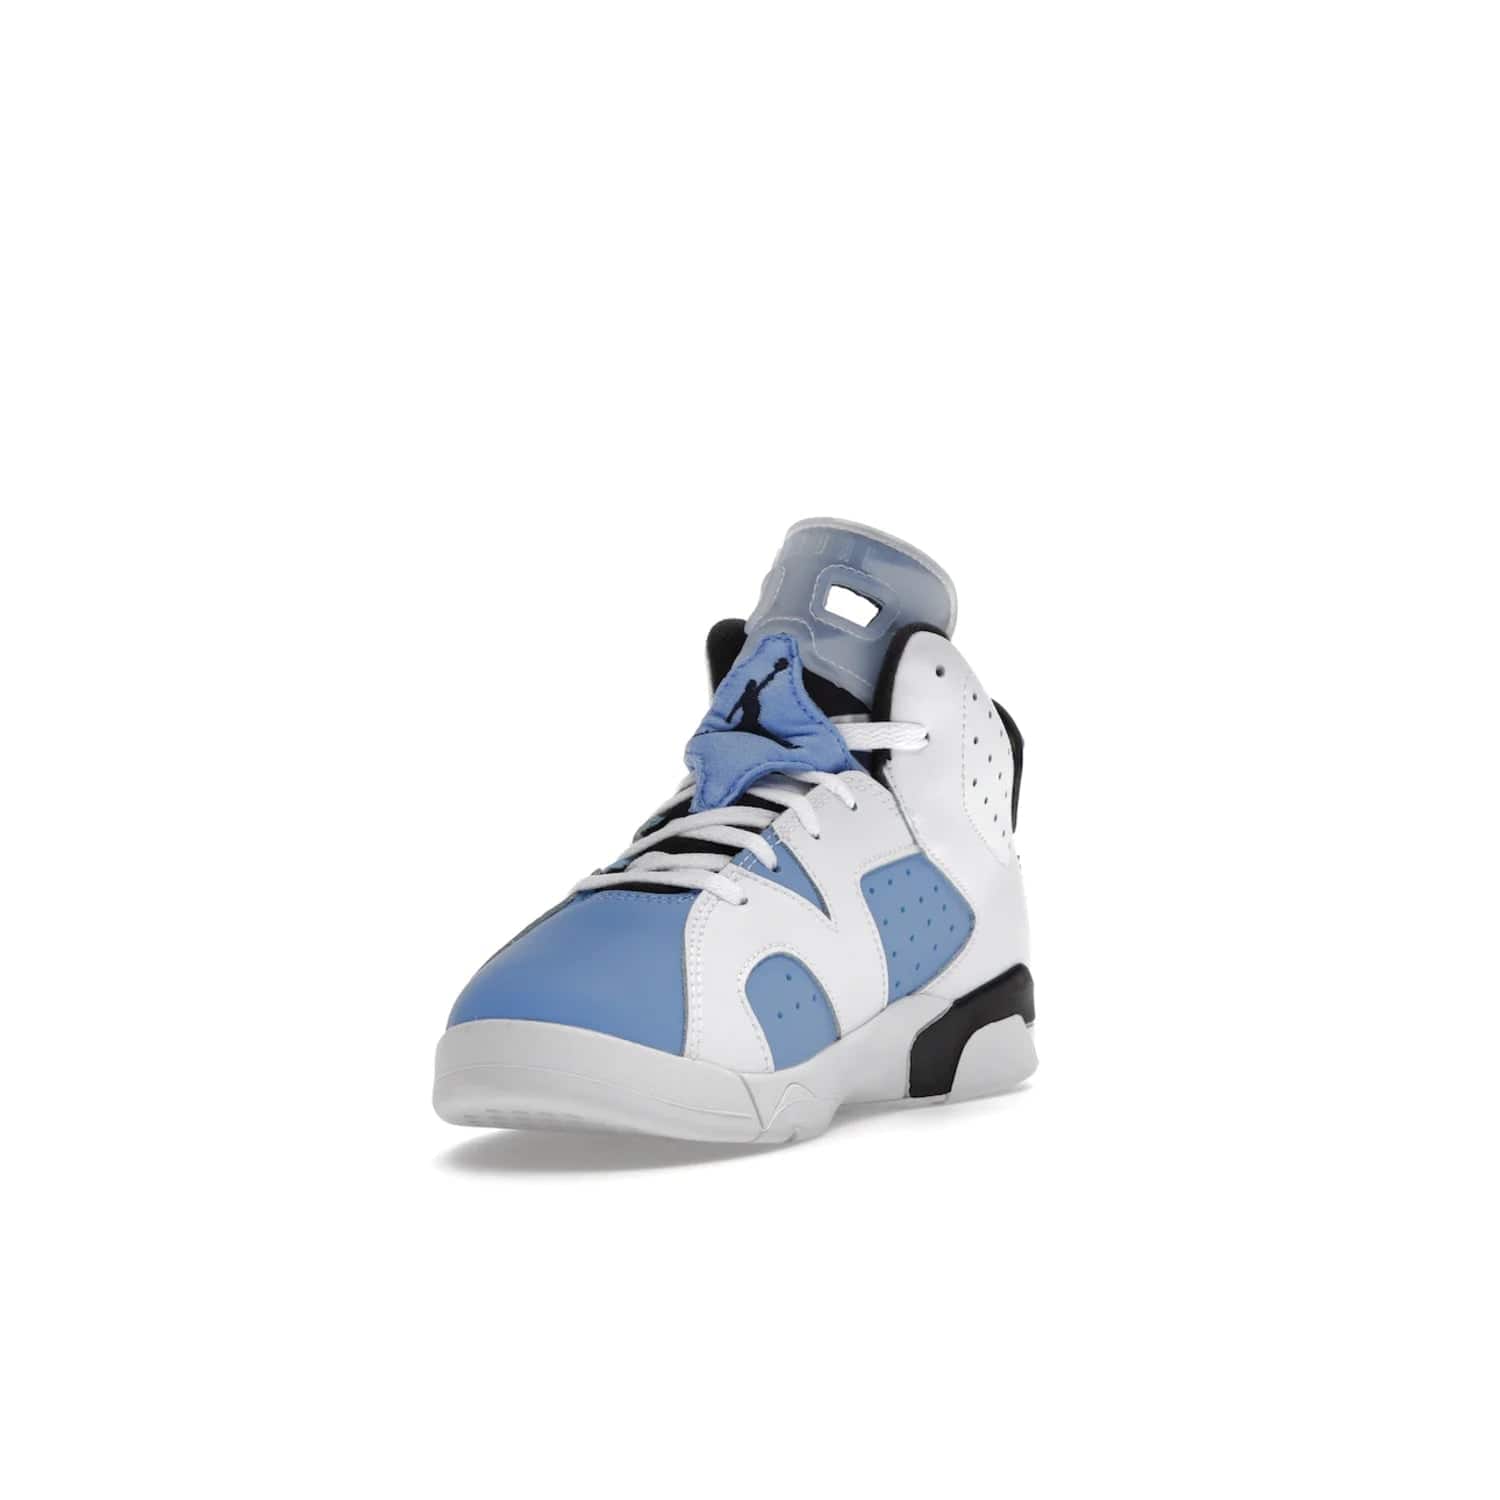 Jordan 6 Retro UNC White (PS) - Image 13 - Only at www.BallersClubKickz.com - The Air Jordan 6 Retro UNC White PS celebrates Michael Jordan's alma mater, the University of North Carolina. It features a classic color-blocking of the iconic Jordan 6 Carmine and a stitched Jordan Team patch. This must-have sneaker released on April 27th, 2022. Referencing the university colors, get this shoe for a stylish and timeless style with university pride.